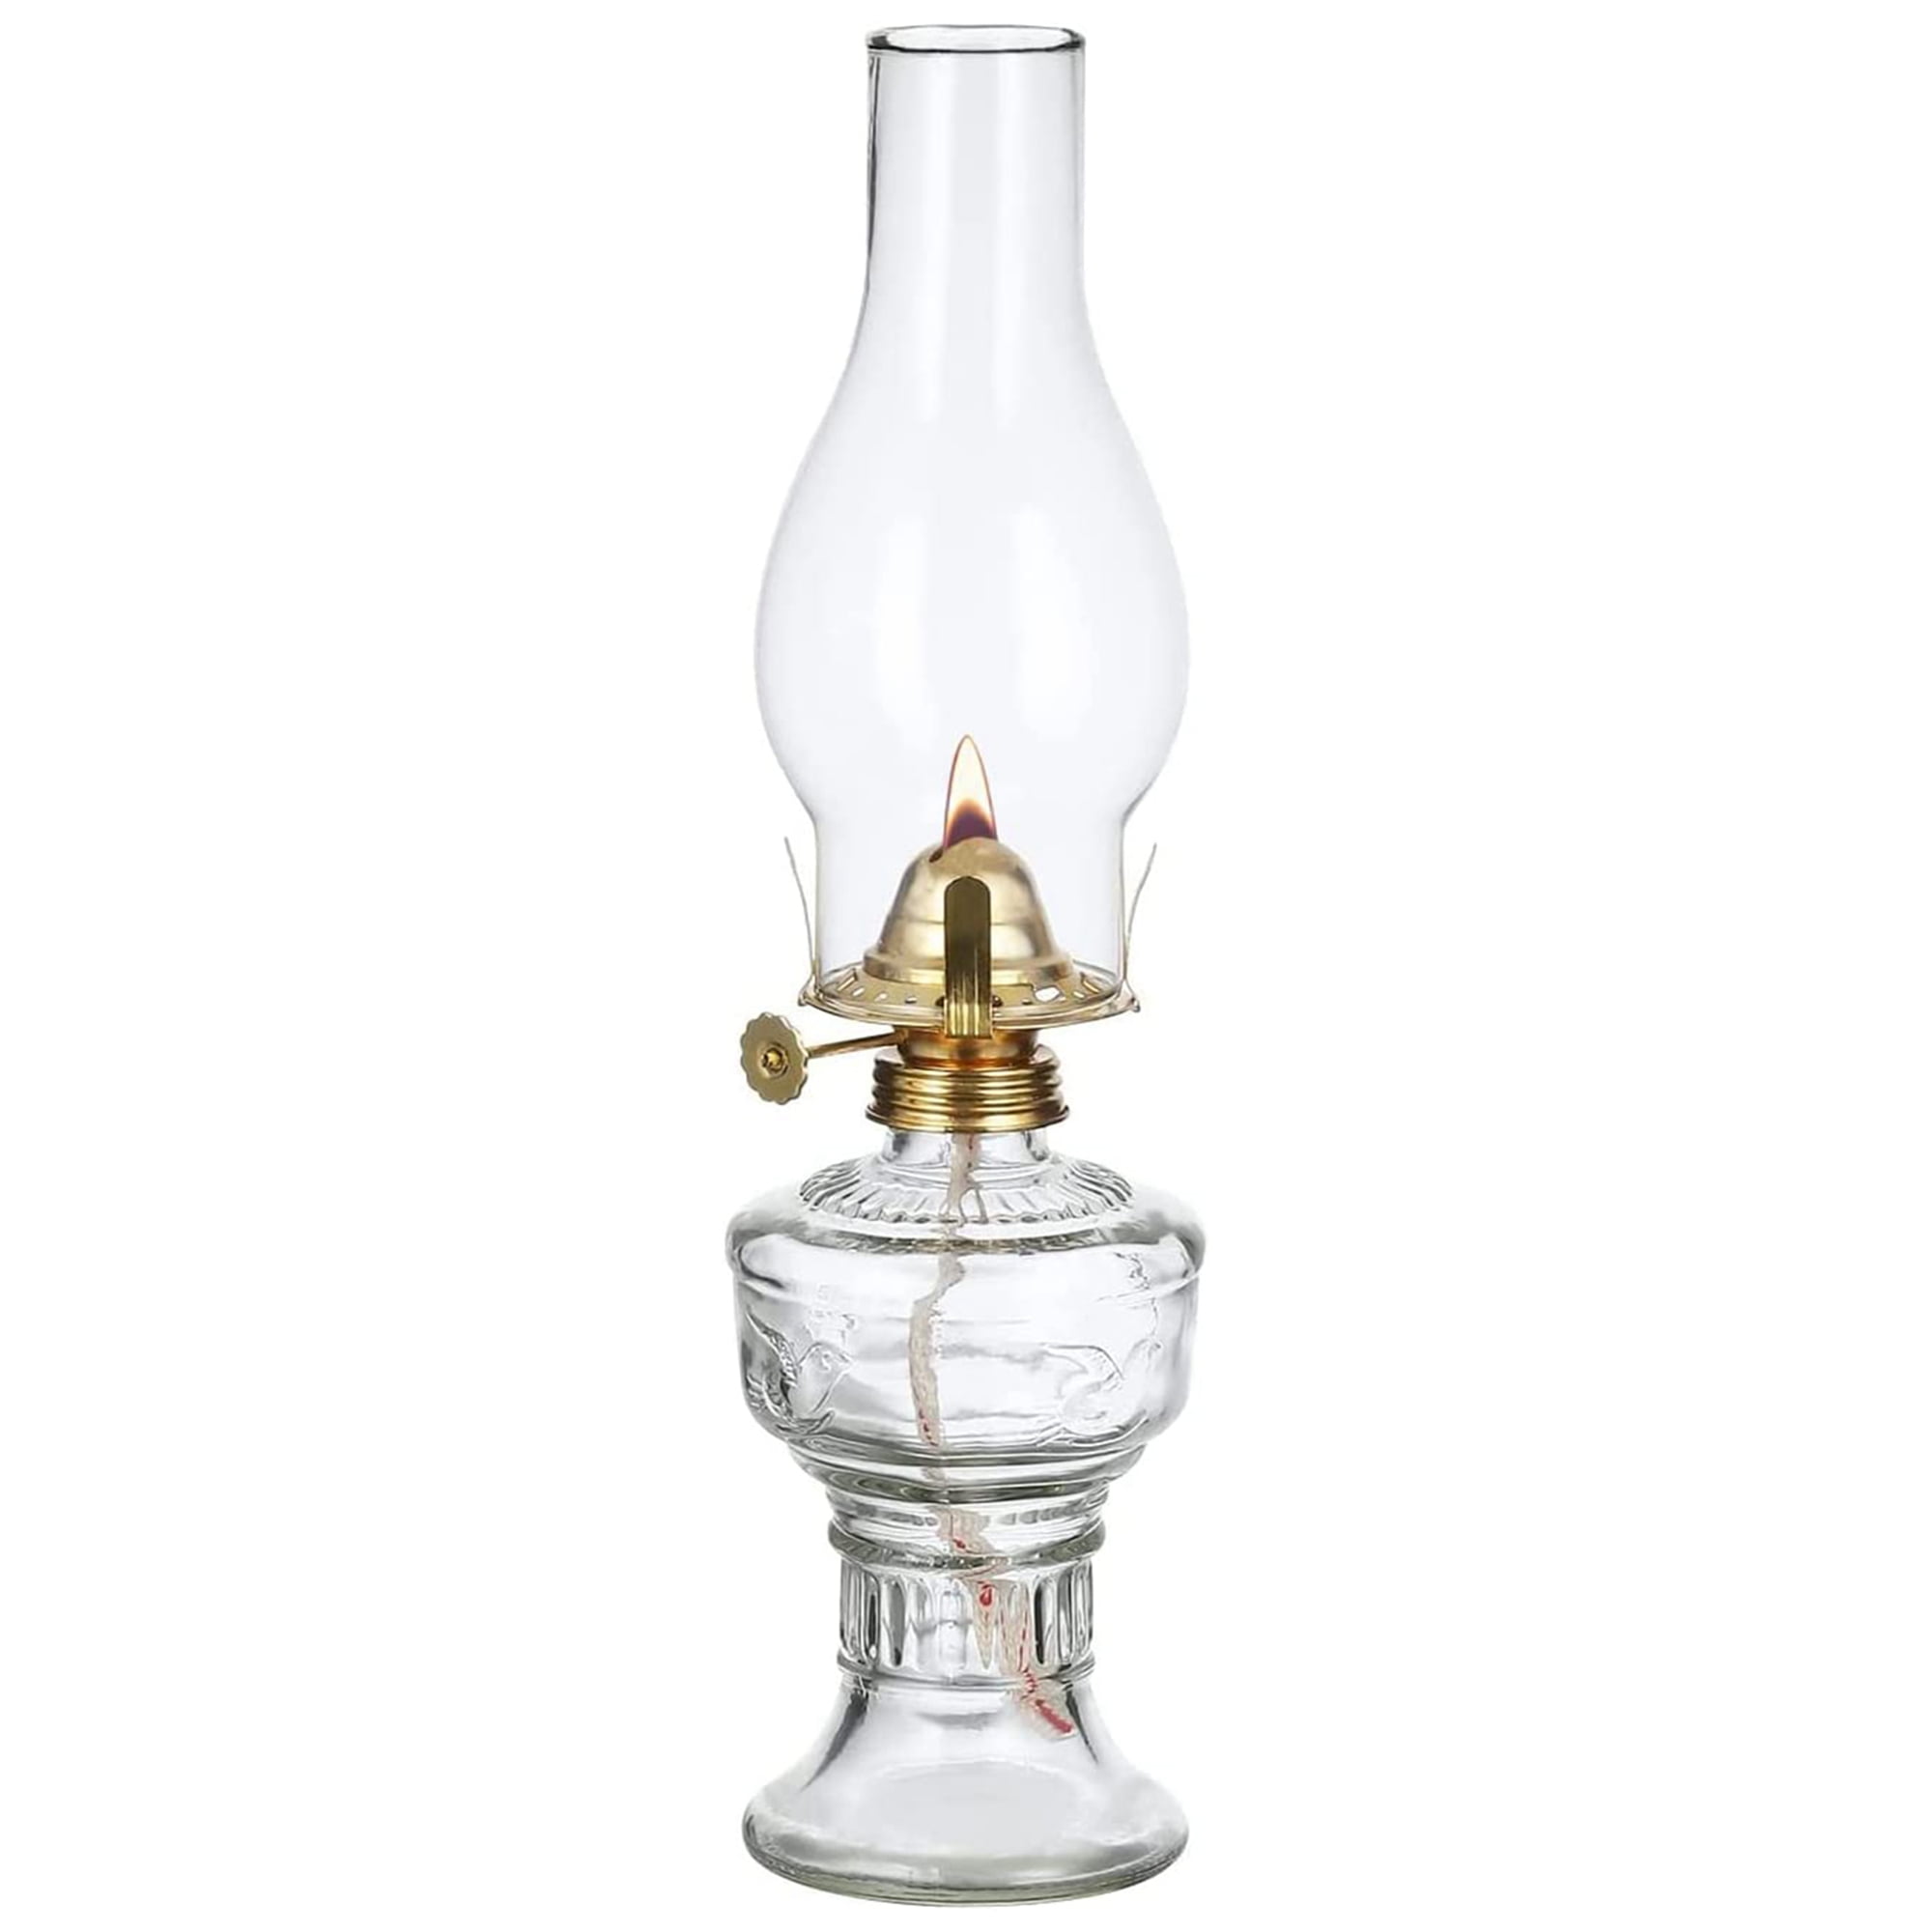 DNRVK Vintage Red Kerosene Lamp with Handle Large Color Glass Oil Lamps for Indoor Use Decorative Indoor Oil Lamp Hurricane Lamp Lantern for